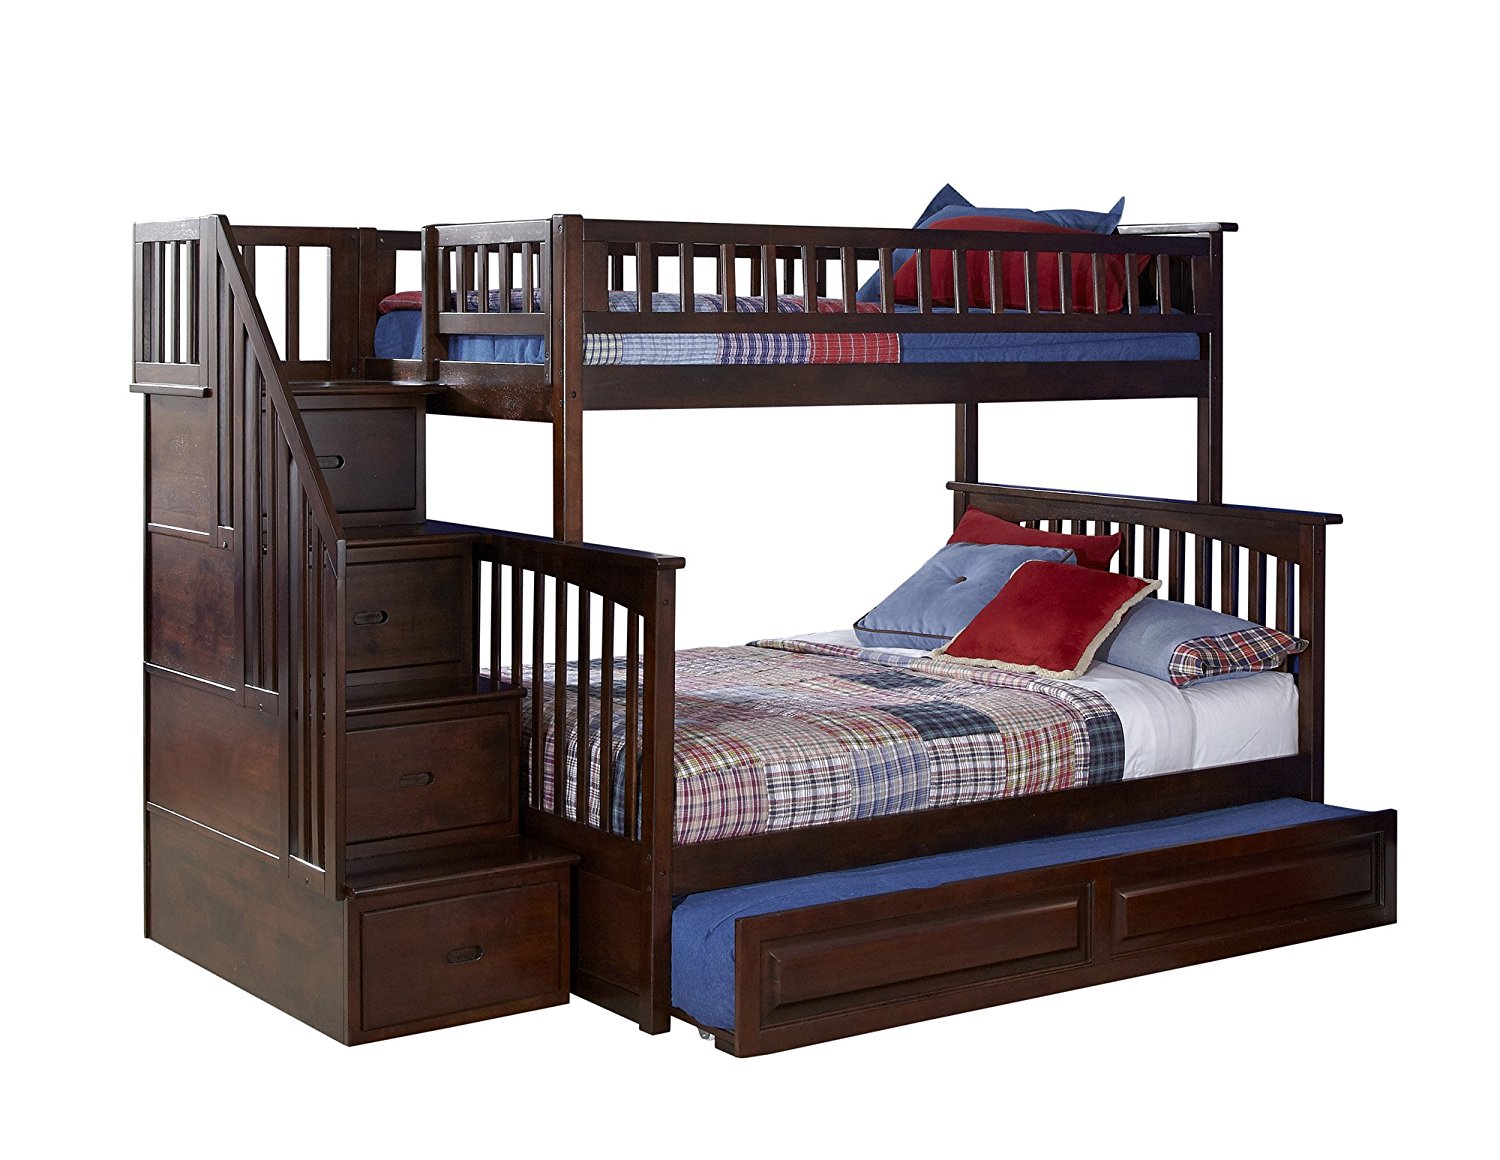 Triple Bunk Bed For Kids, Modernluxe Twin Over Full Wood Bunk Bed With Trundle And Storage Stairs